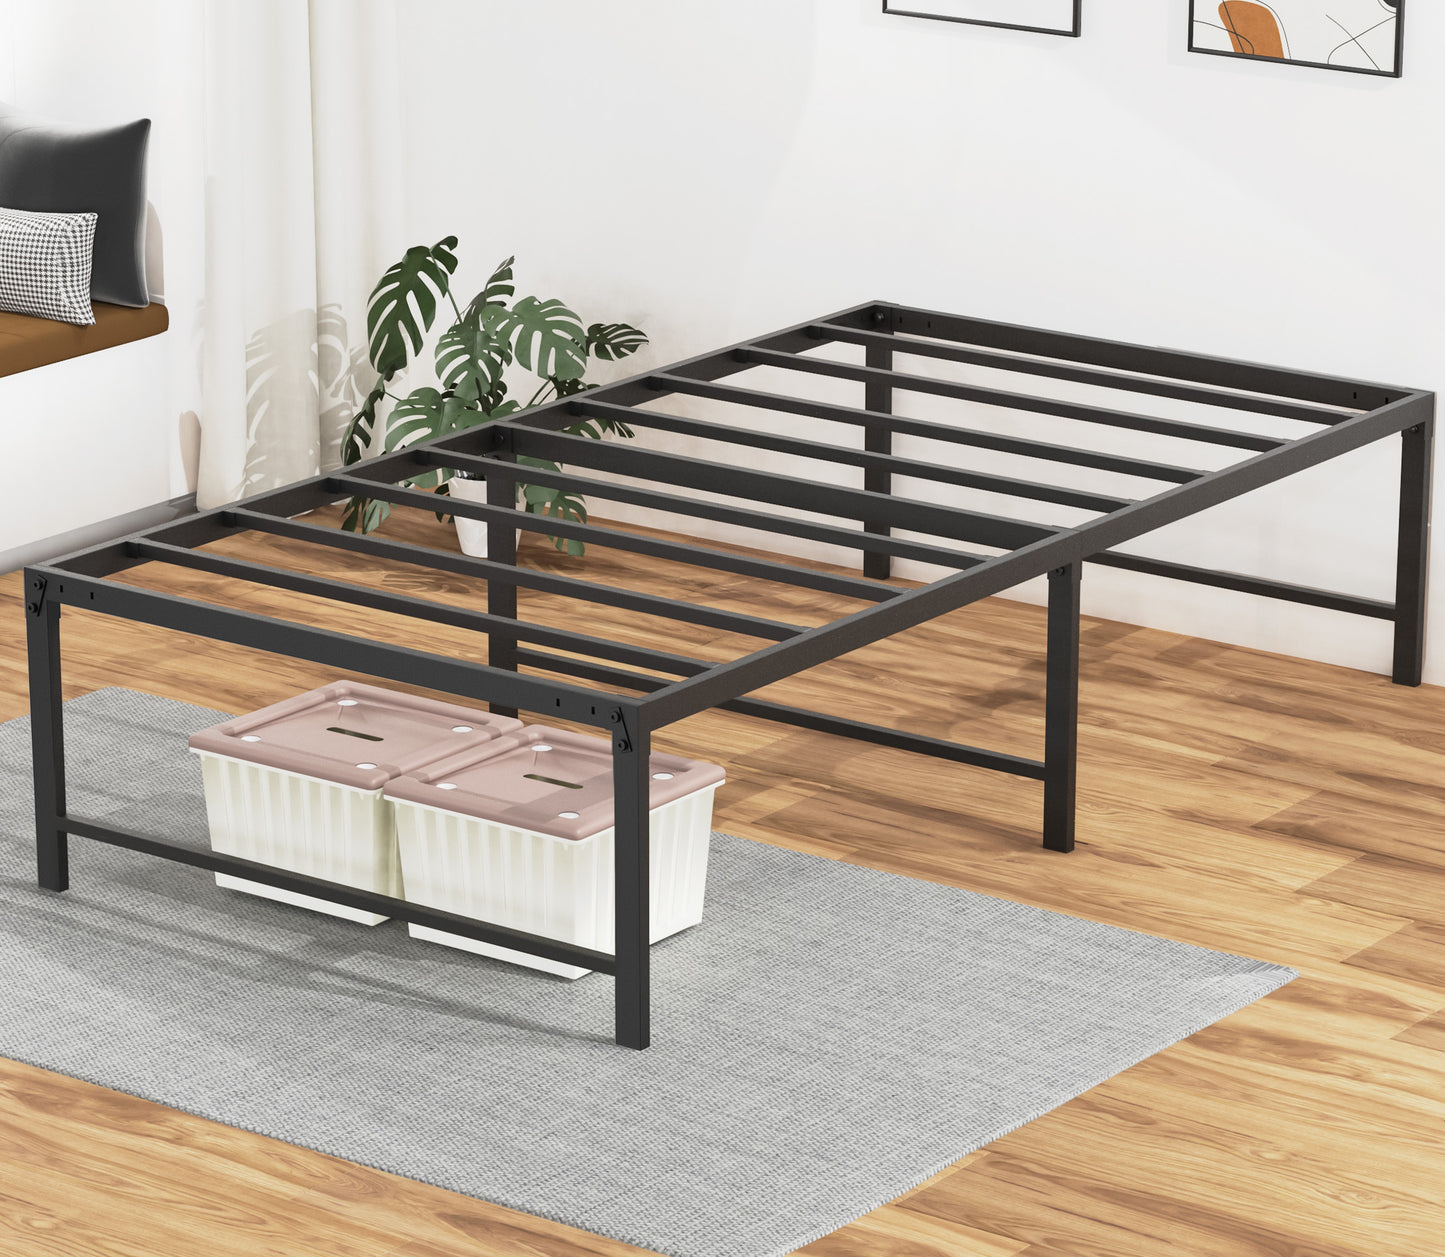 Nefoso Bed Frame, 18 inch Heavy Duty Metal Platform Bed Frame, No Box Spring Needed